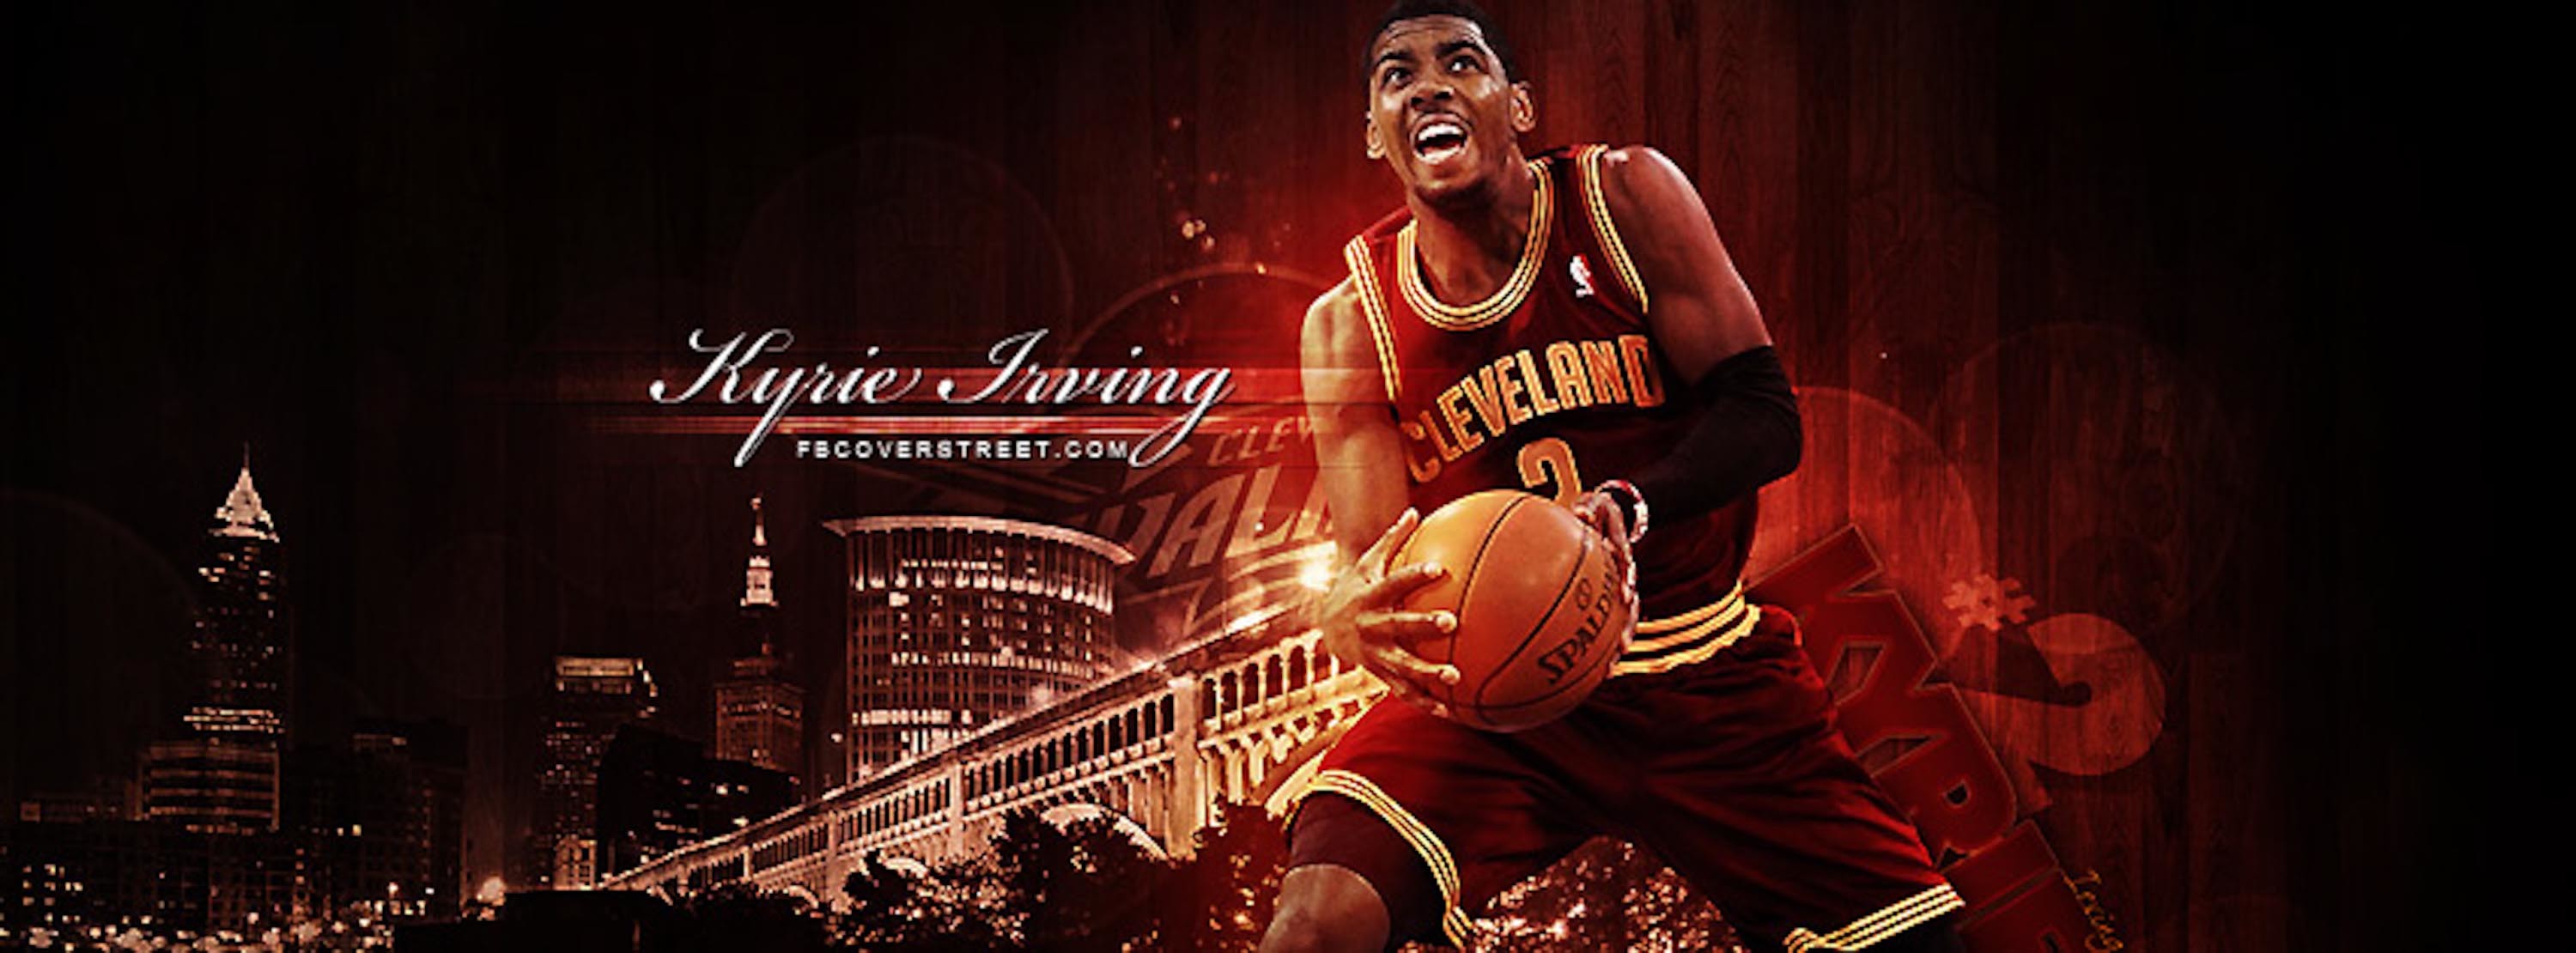 3000x1110 Kyrie irving iphone wallpaper | Android | Pinterest